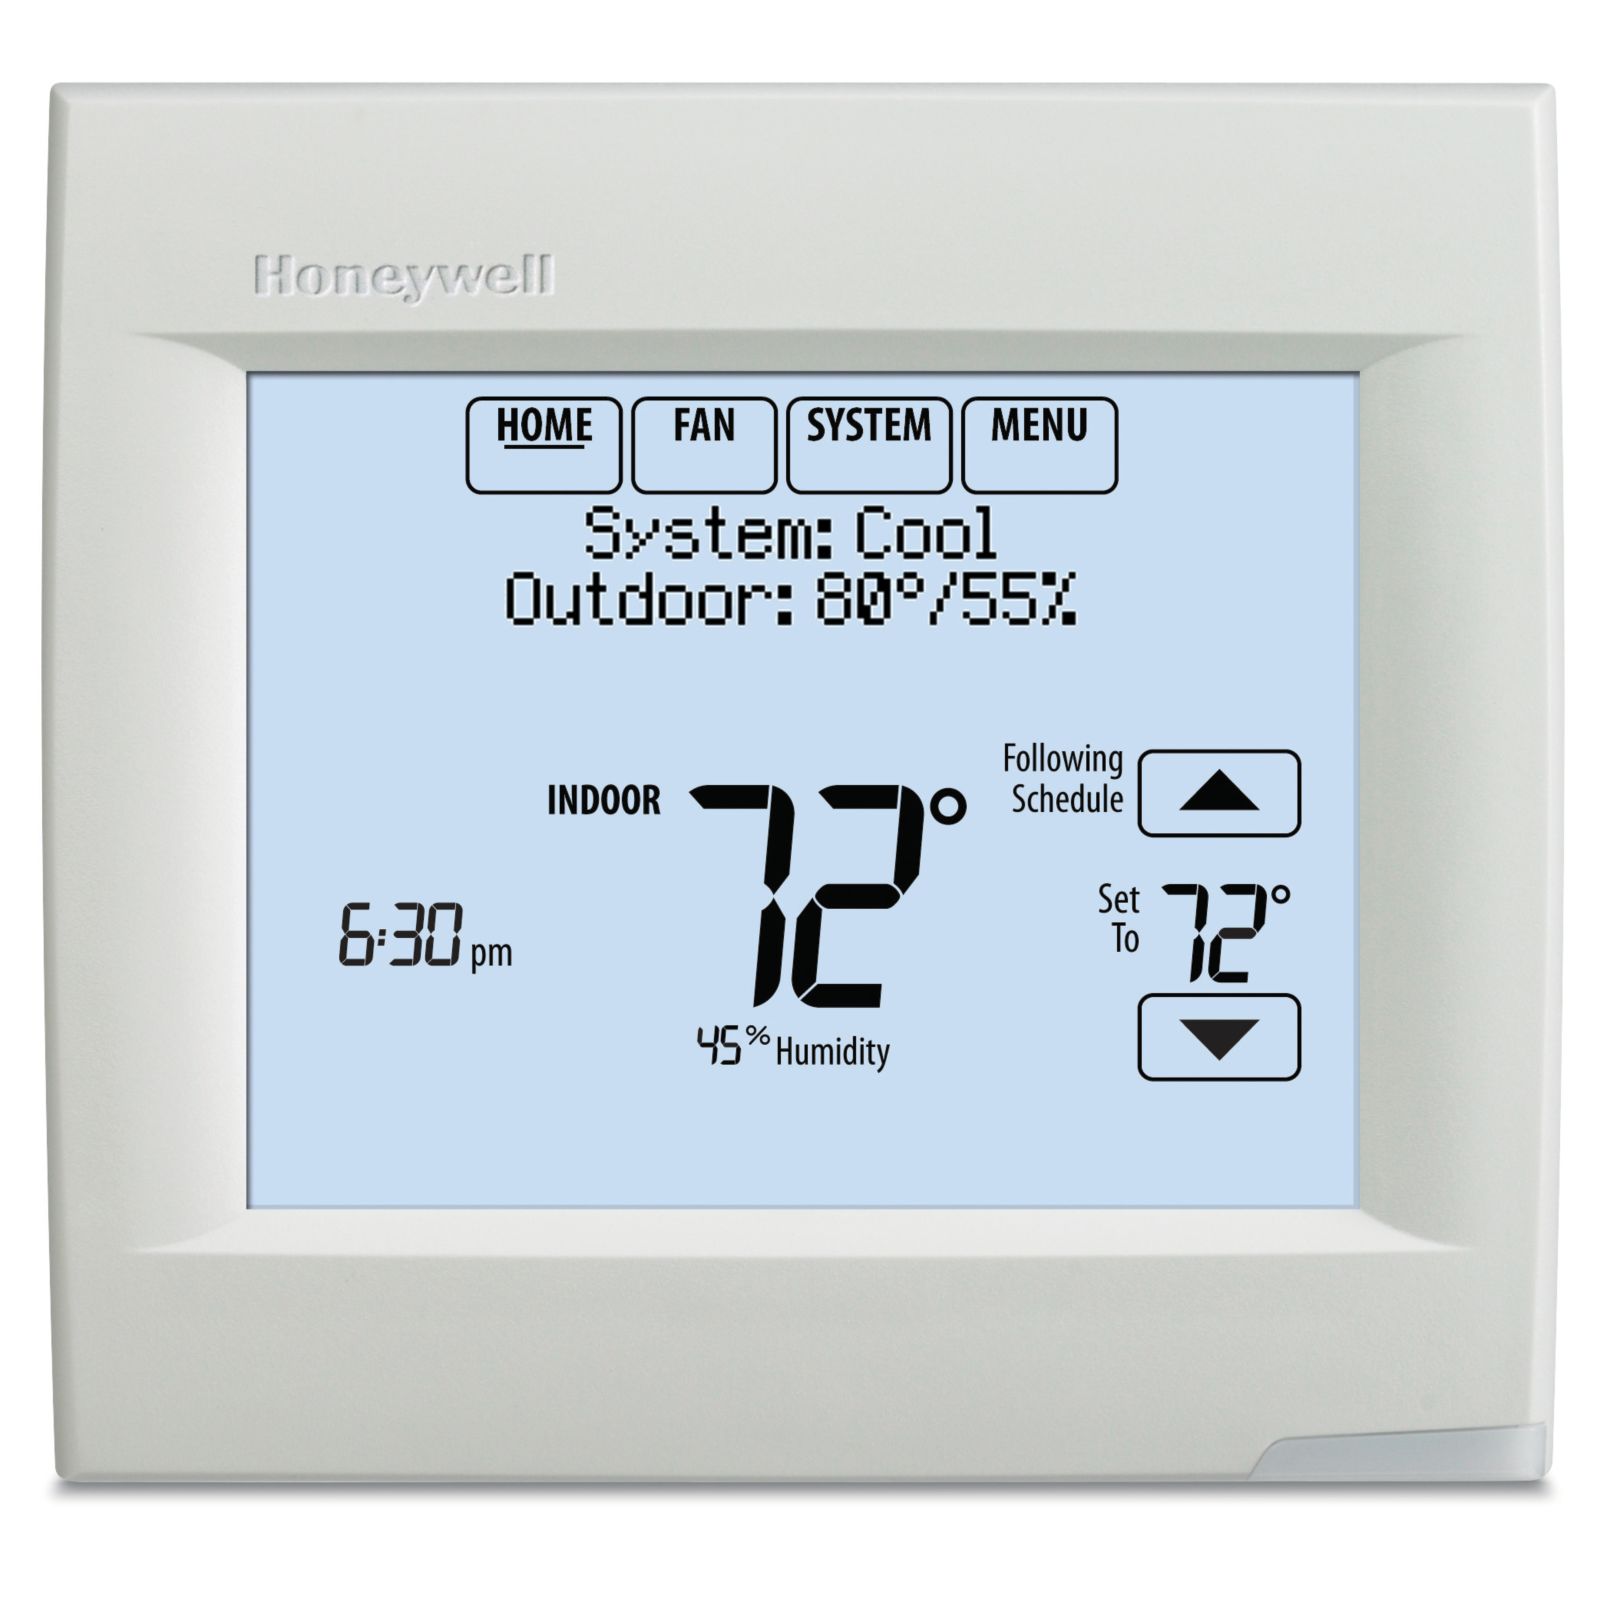 How To Reset Screen Locked On Honeywell Vision Pro Th8321r1001 Thermostat